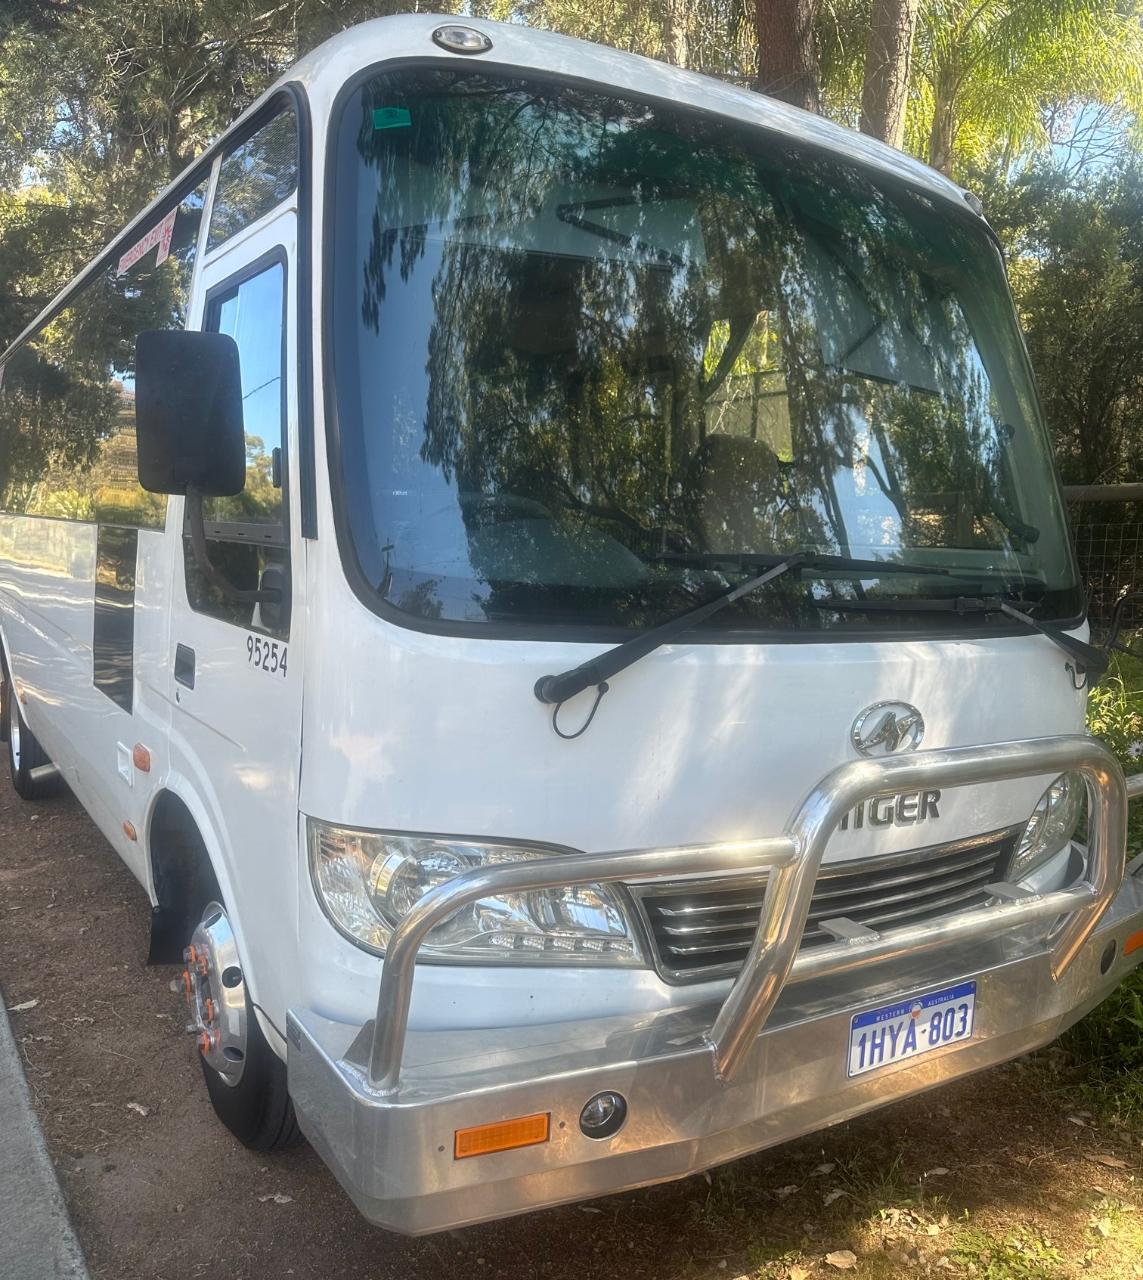 28 Passenger seat small bus Perth City to Airport transfer